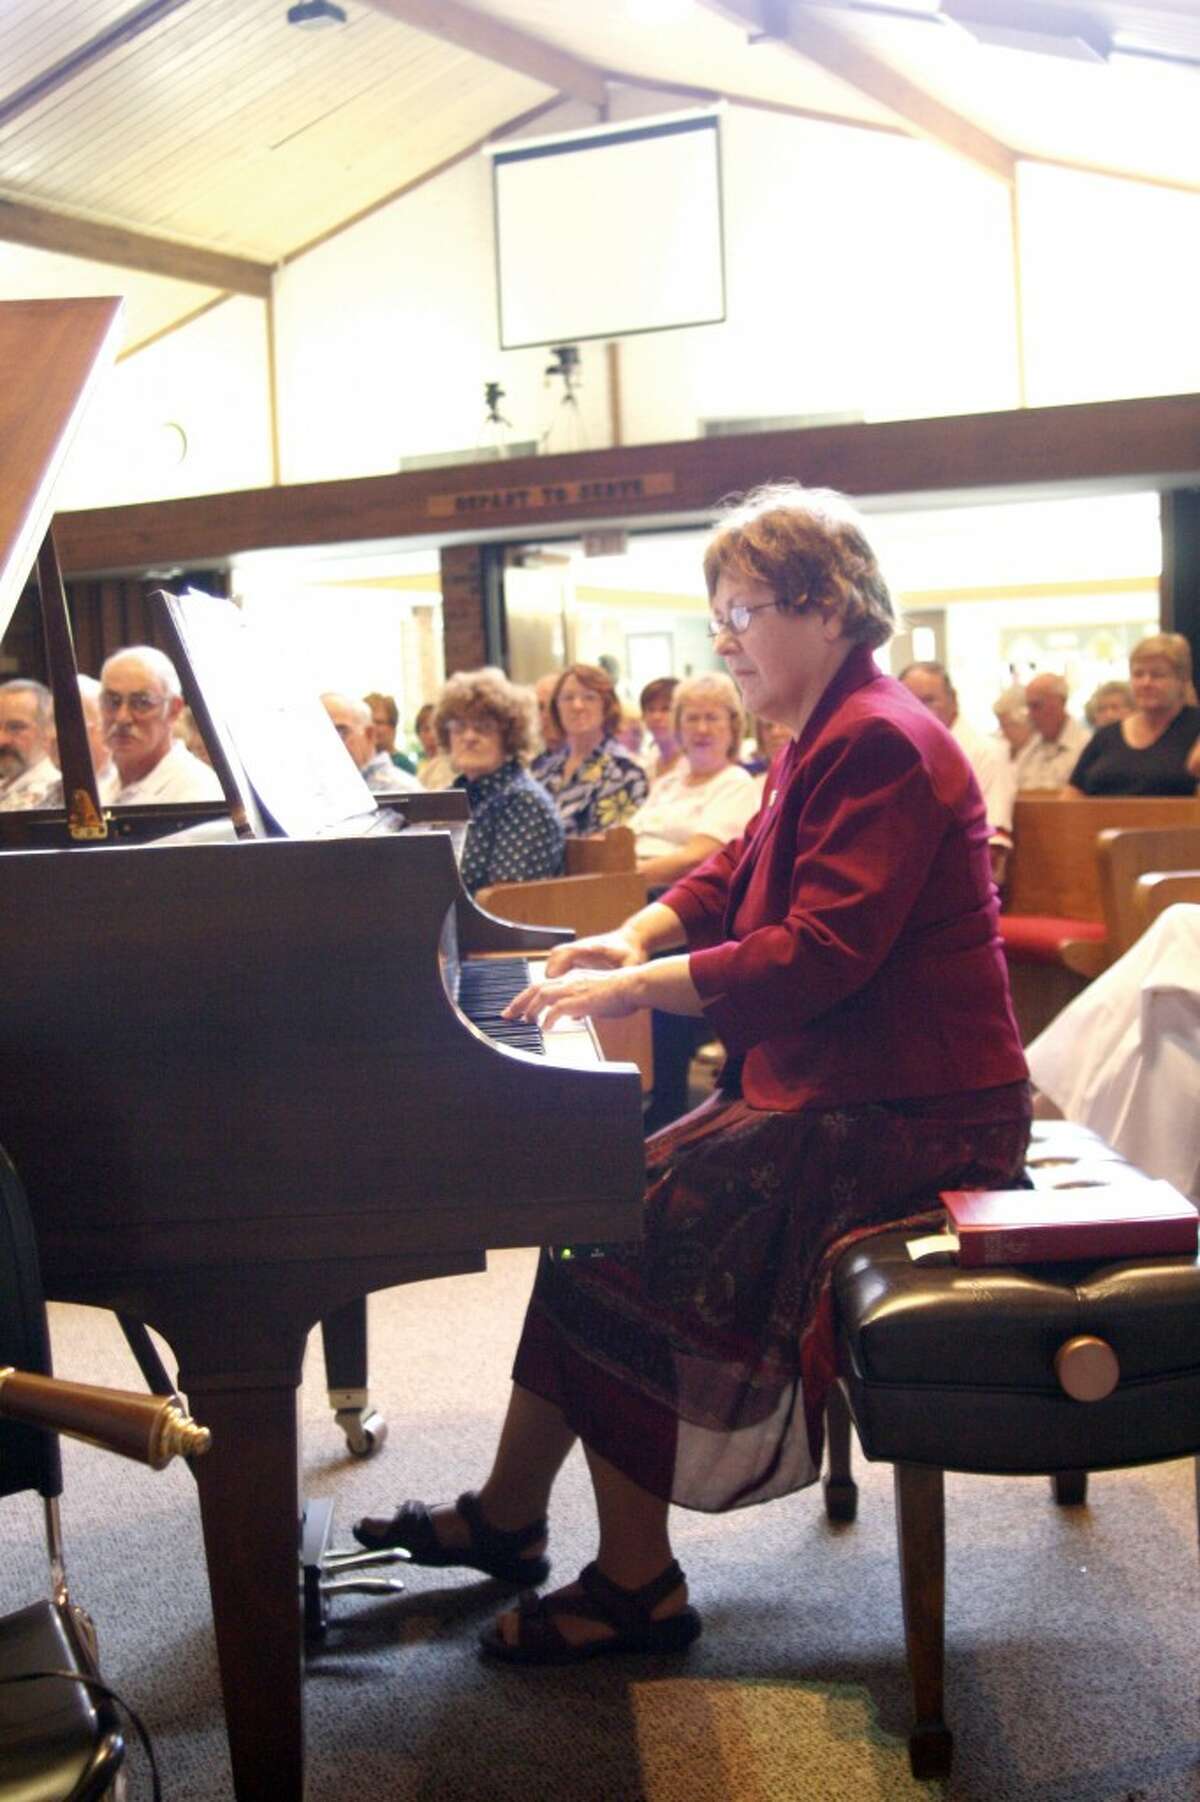 MUSICAL CELEBRATION: Lois Hinkins Stilber, a member of the Rev. George Bennard’s family, plays a song for the audience at the Old Rugged Cross Centennial Celebration on Aug. 10. (Courtesy photo/Dianne Phelps)